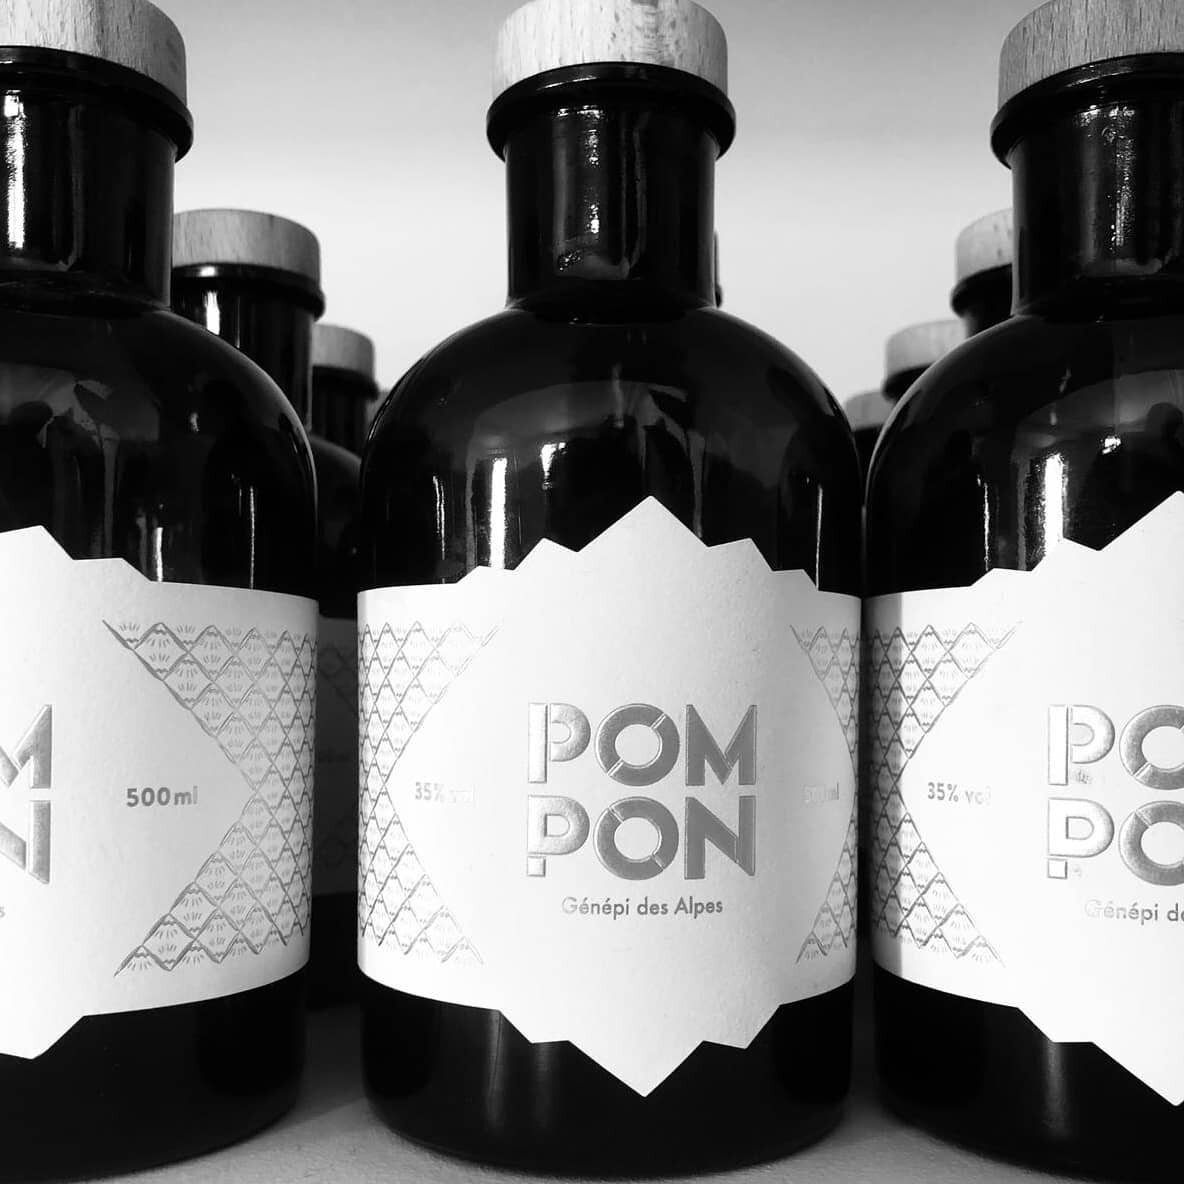 Dry January is almost over. Pompon February is coming!